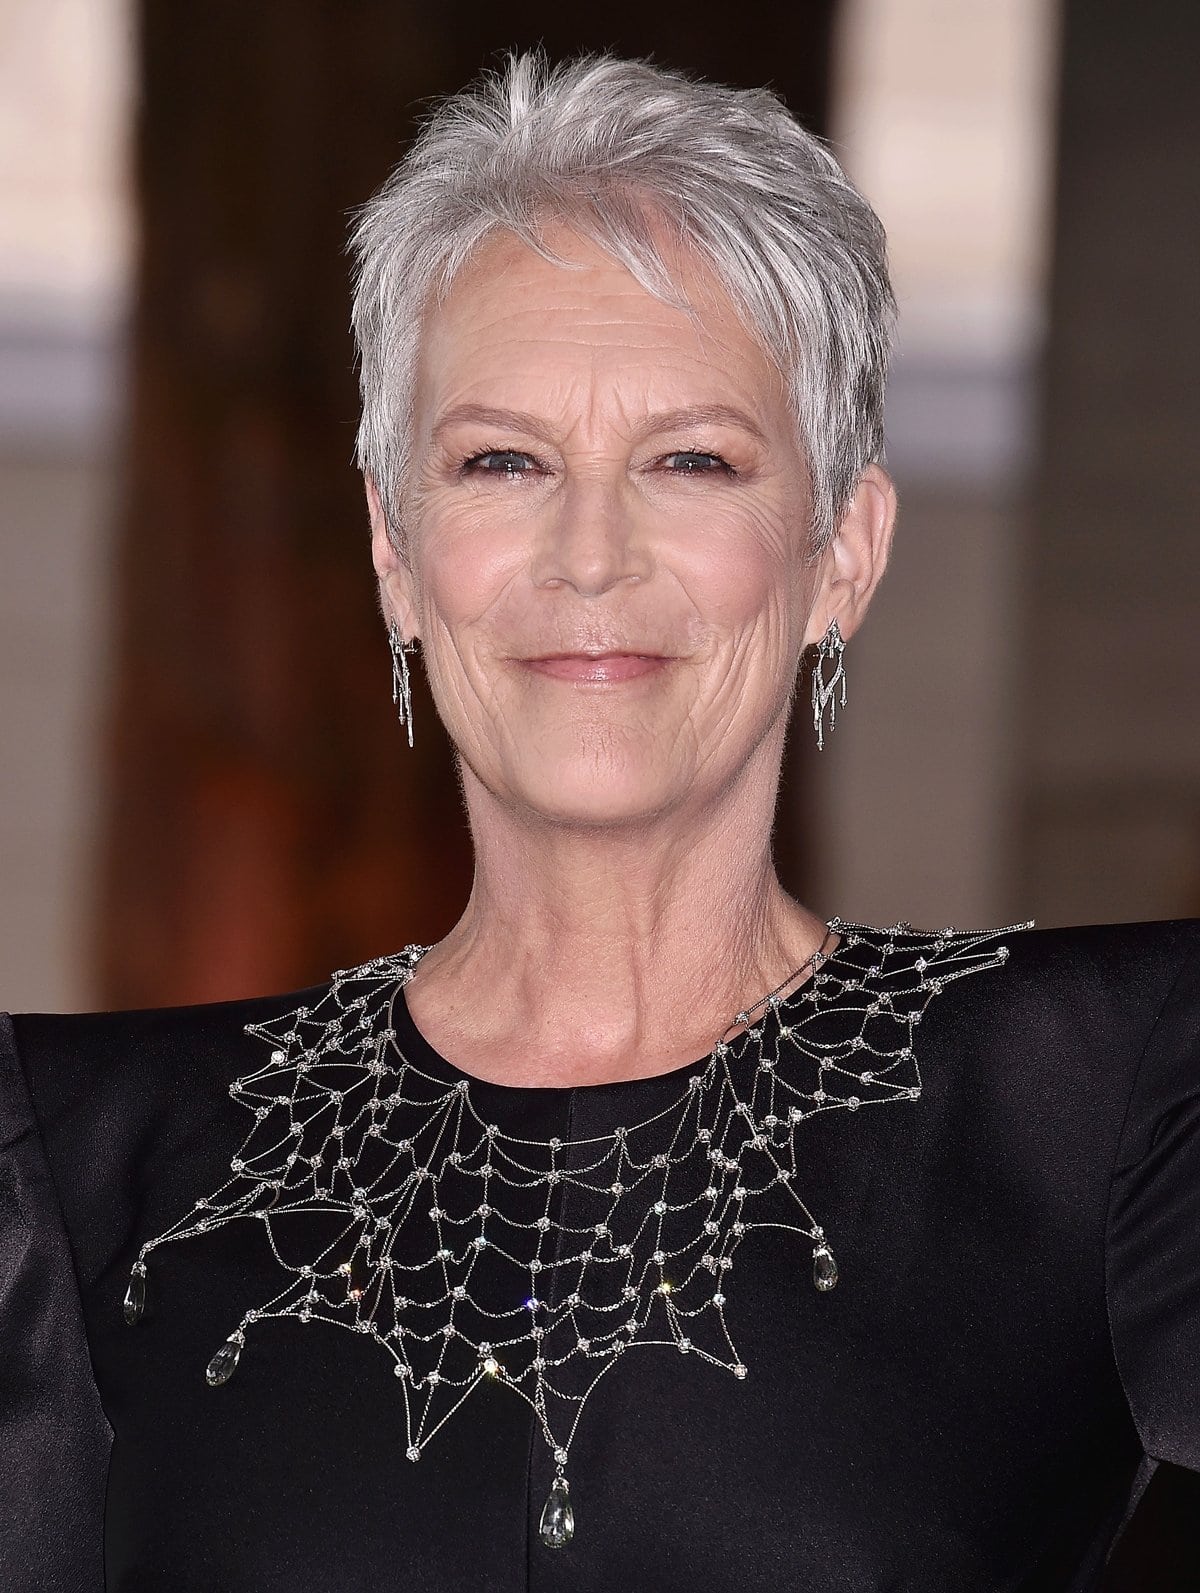 Jamie Lee Curtis in a dress by Alex Perry at The Academy Museum of Motion Pictures Opening Gala Eva held on September 25, 2021, at the Academy Museum of Motion Pictures in Los Angeles